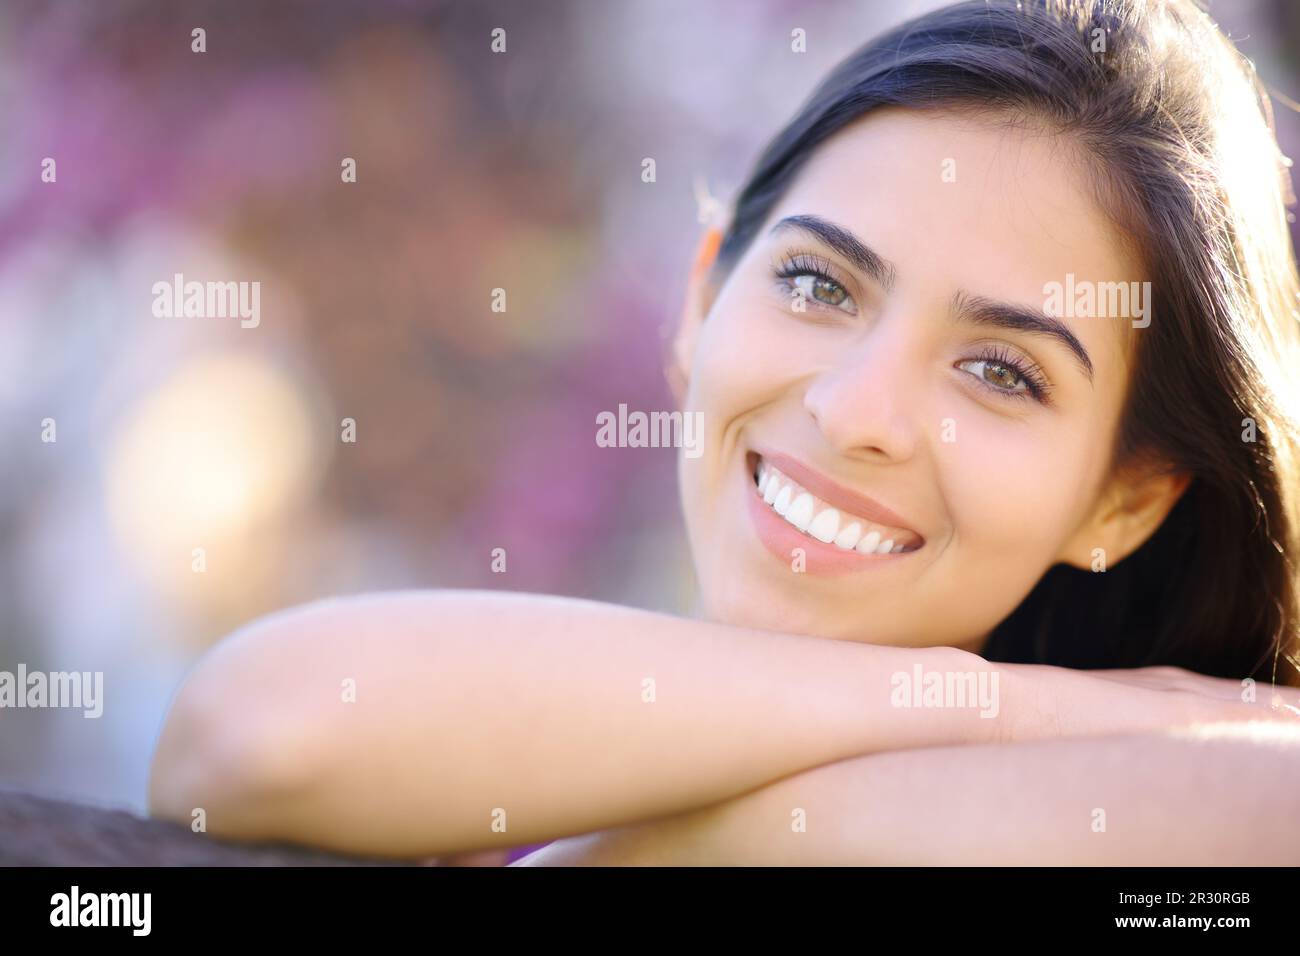 Front view of a beautiful woman with perfect white teeth smiling at you in a park Stock Photo